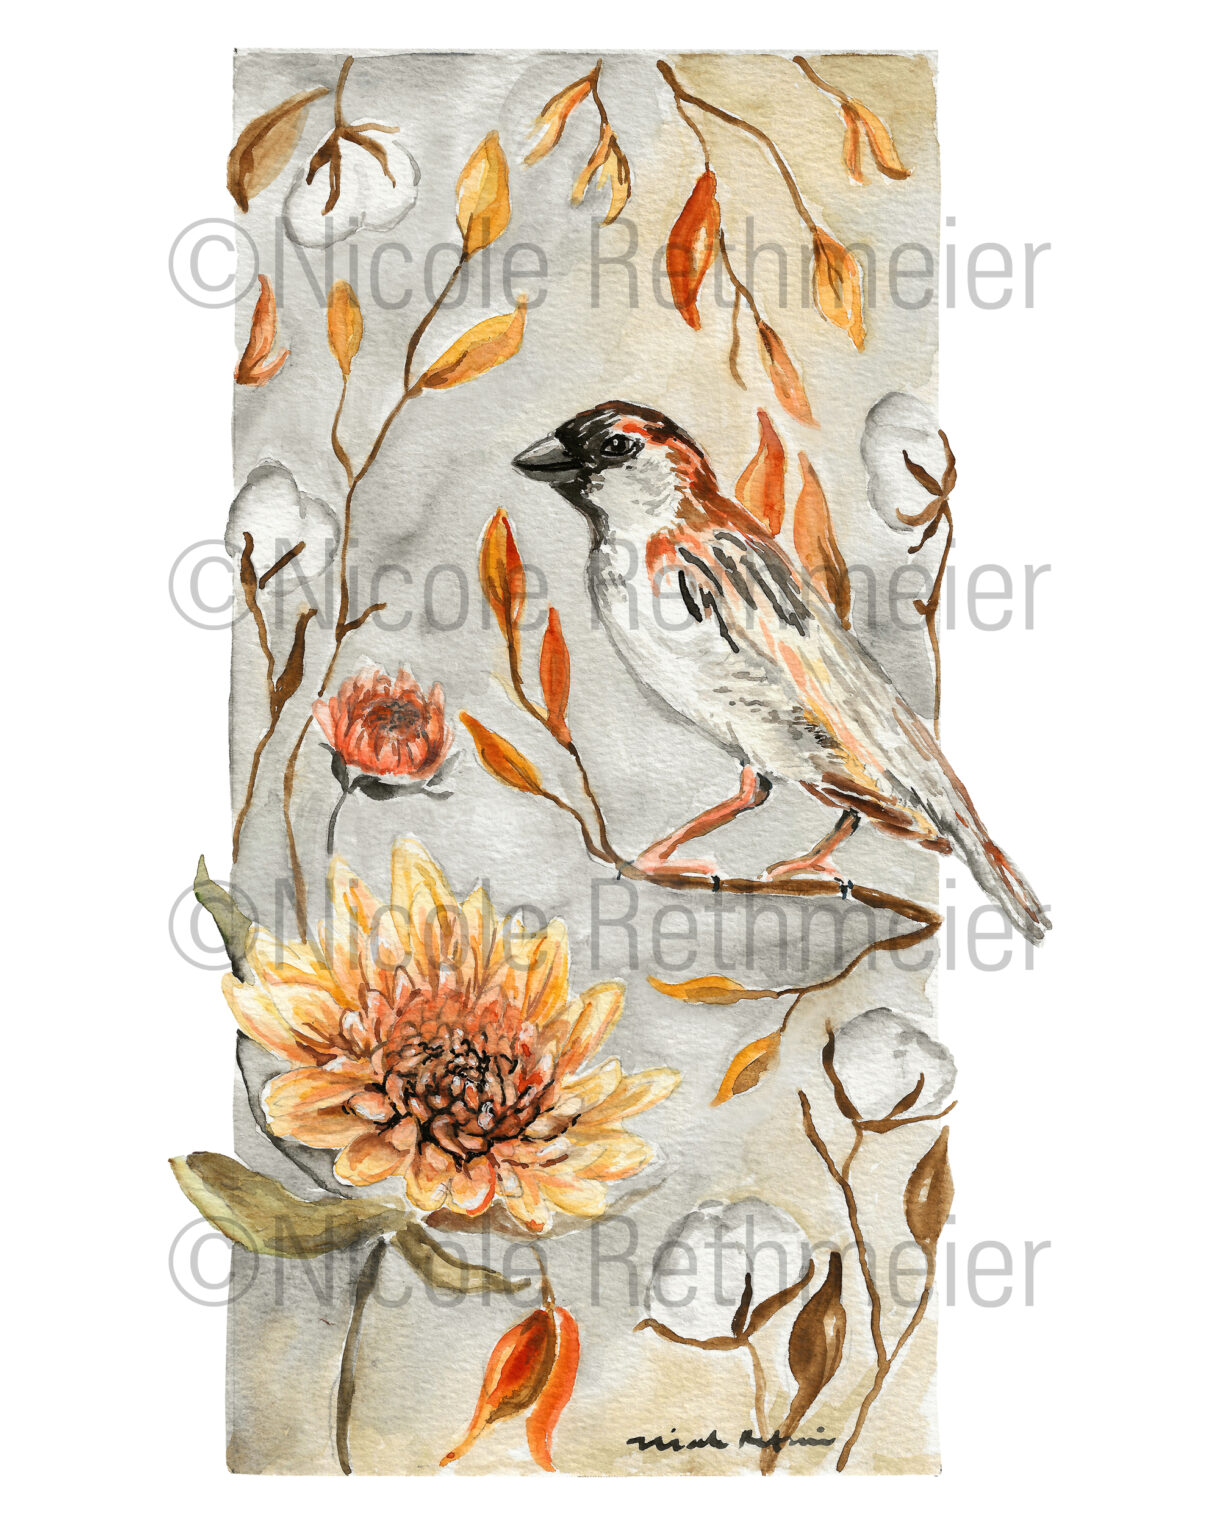 His Eye Is On The Sparrow Watercolor print - Sparrow and fall foliage watercolor wall art